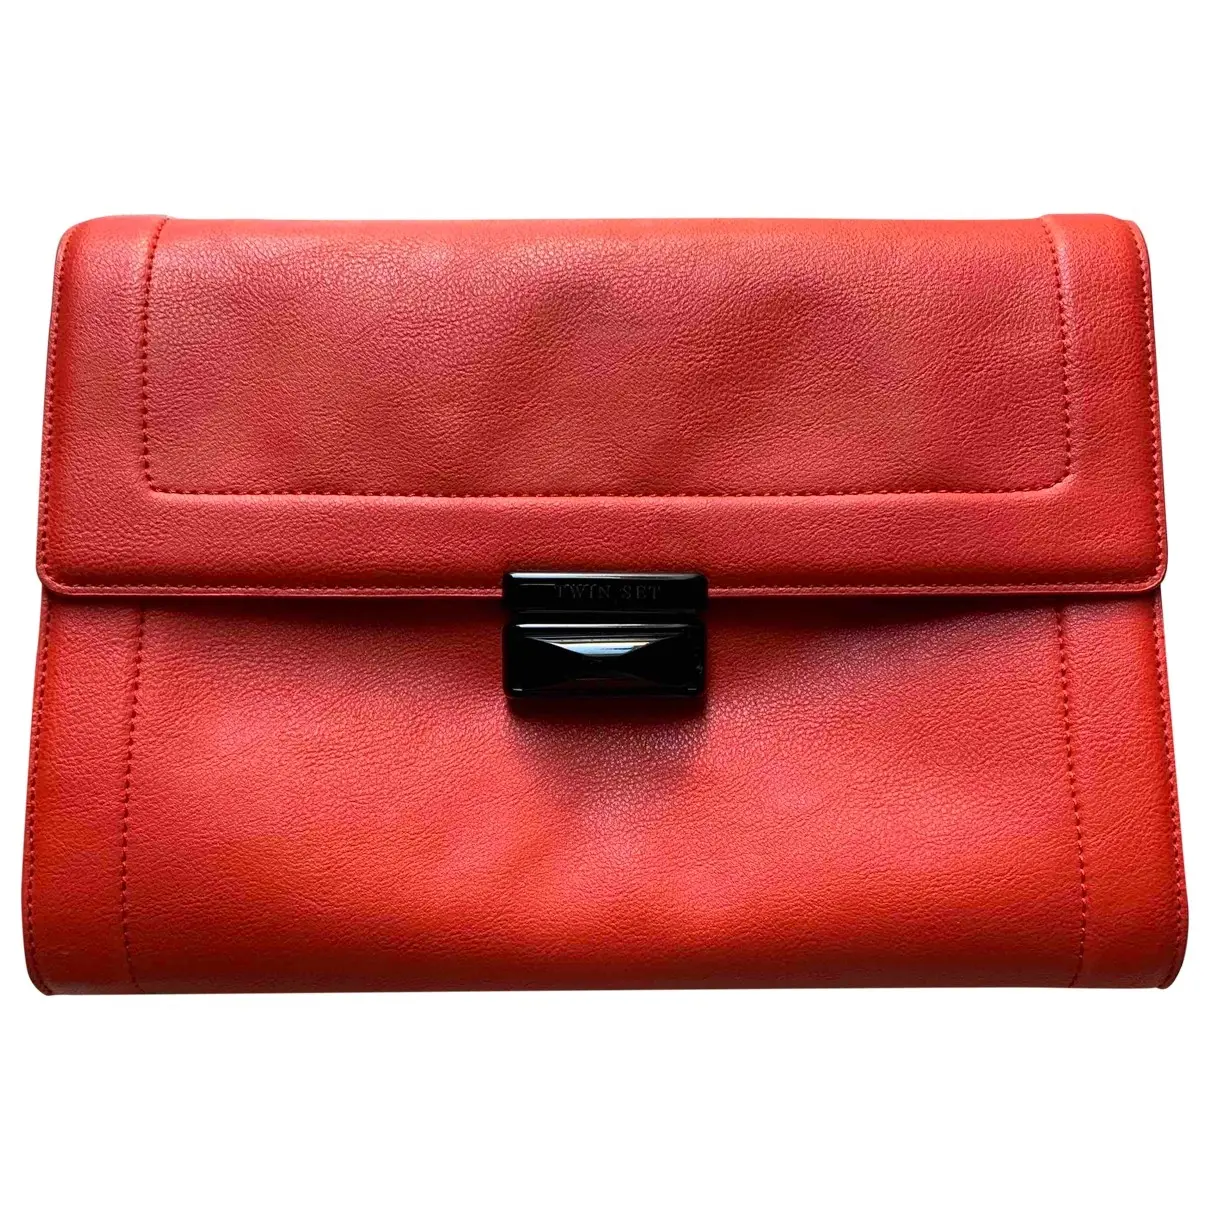 Leather clutch bag Twinset